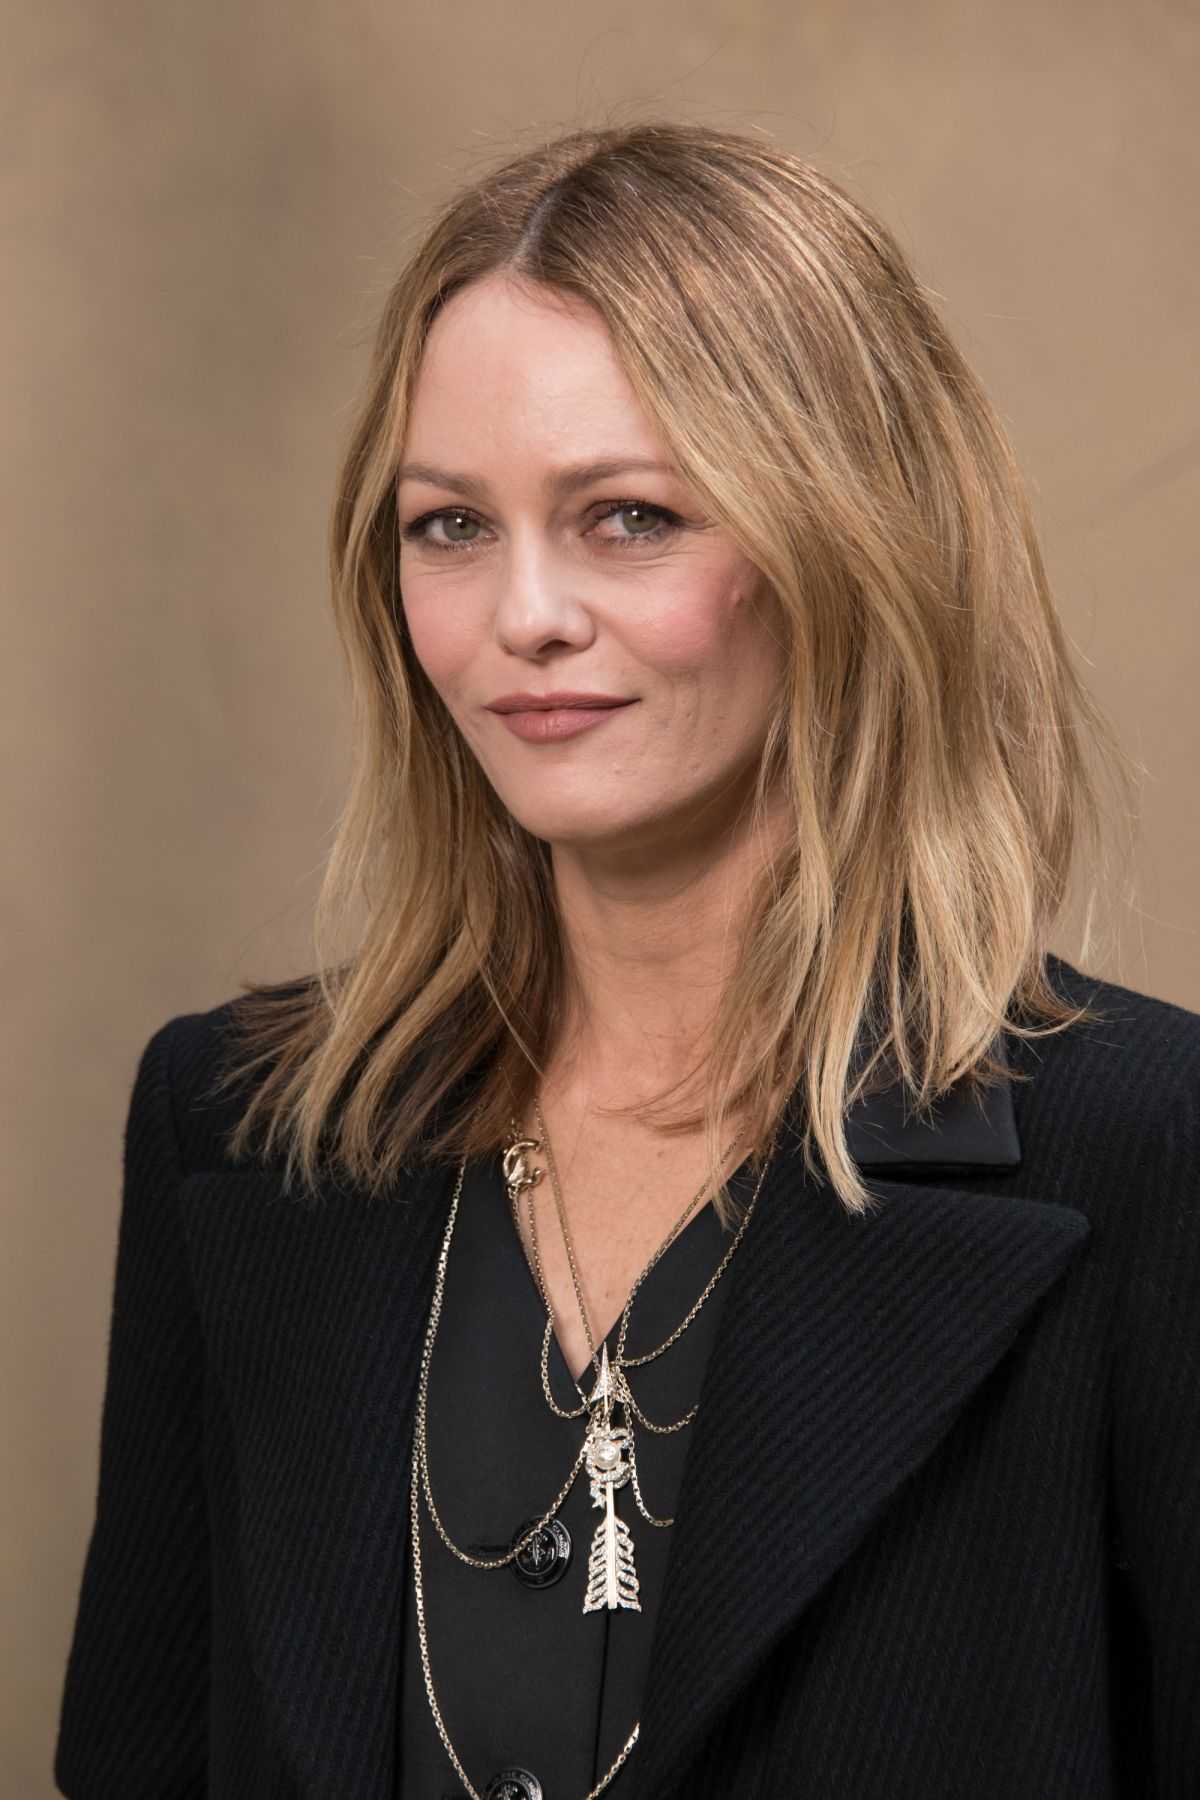 65+ Hot Pictures Of Vanessa Paradis Which Will Make Your Day | Best Of Comic Books